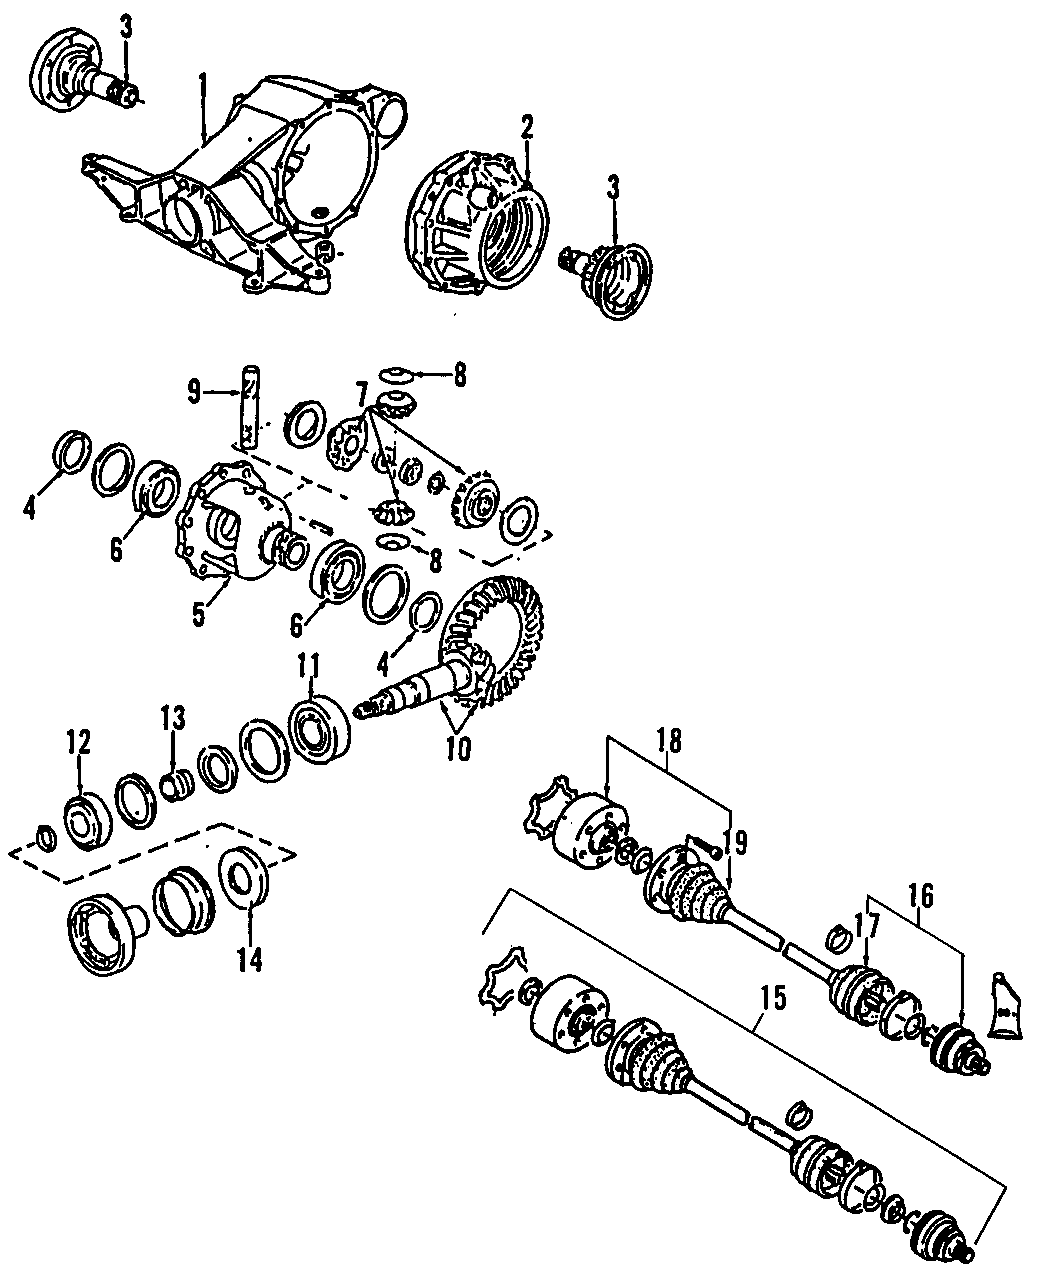 17DRIVE AXLES. REAR AXLE. AXLE SHAFTS & JOINTS. DIFFERENTIAL. PROPELLER SHAFT.https://images.simplepart.com/images/parts/motor/fullsize/F208150.png